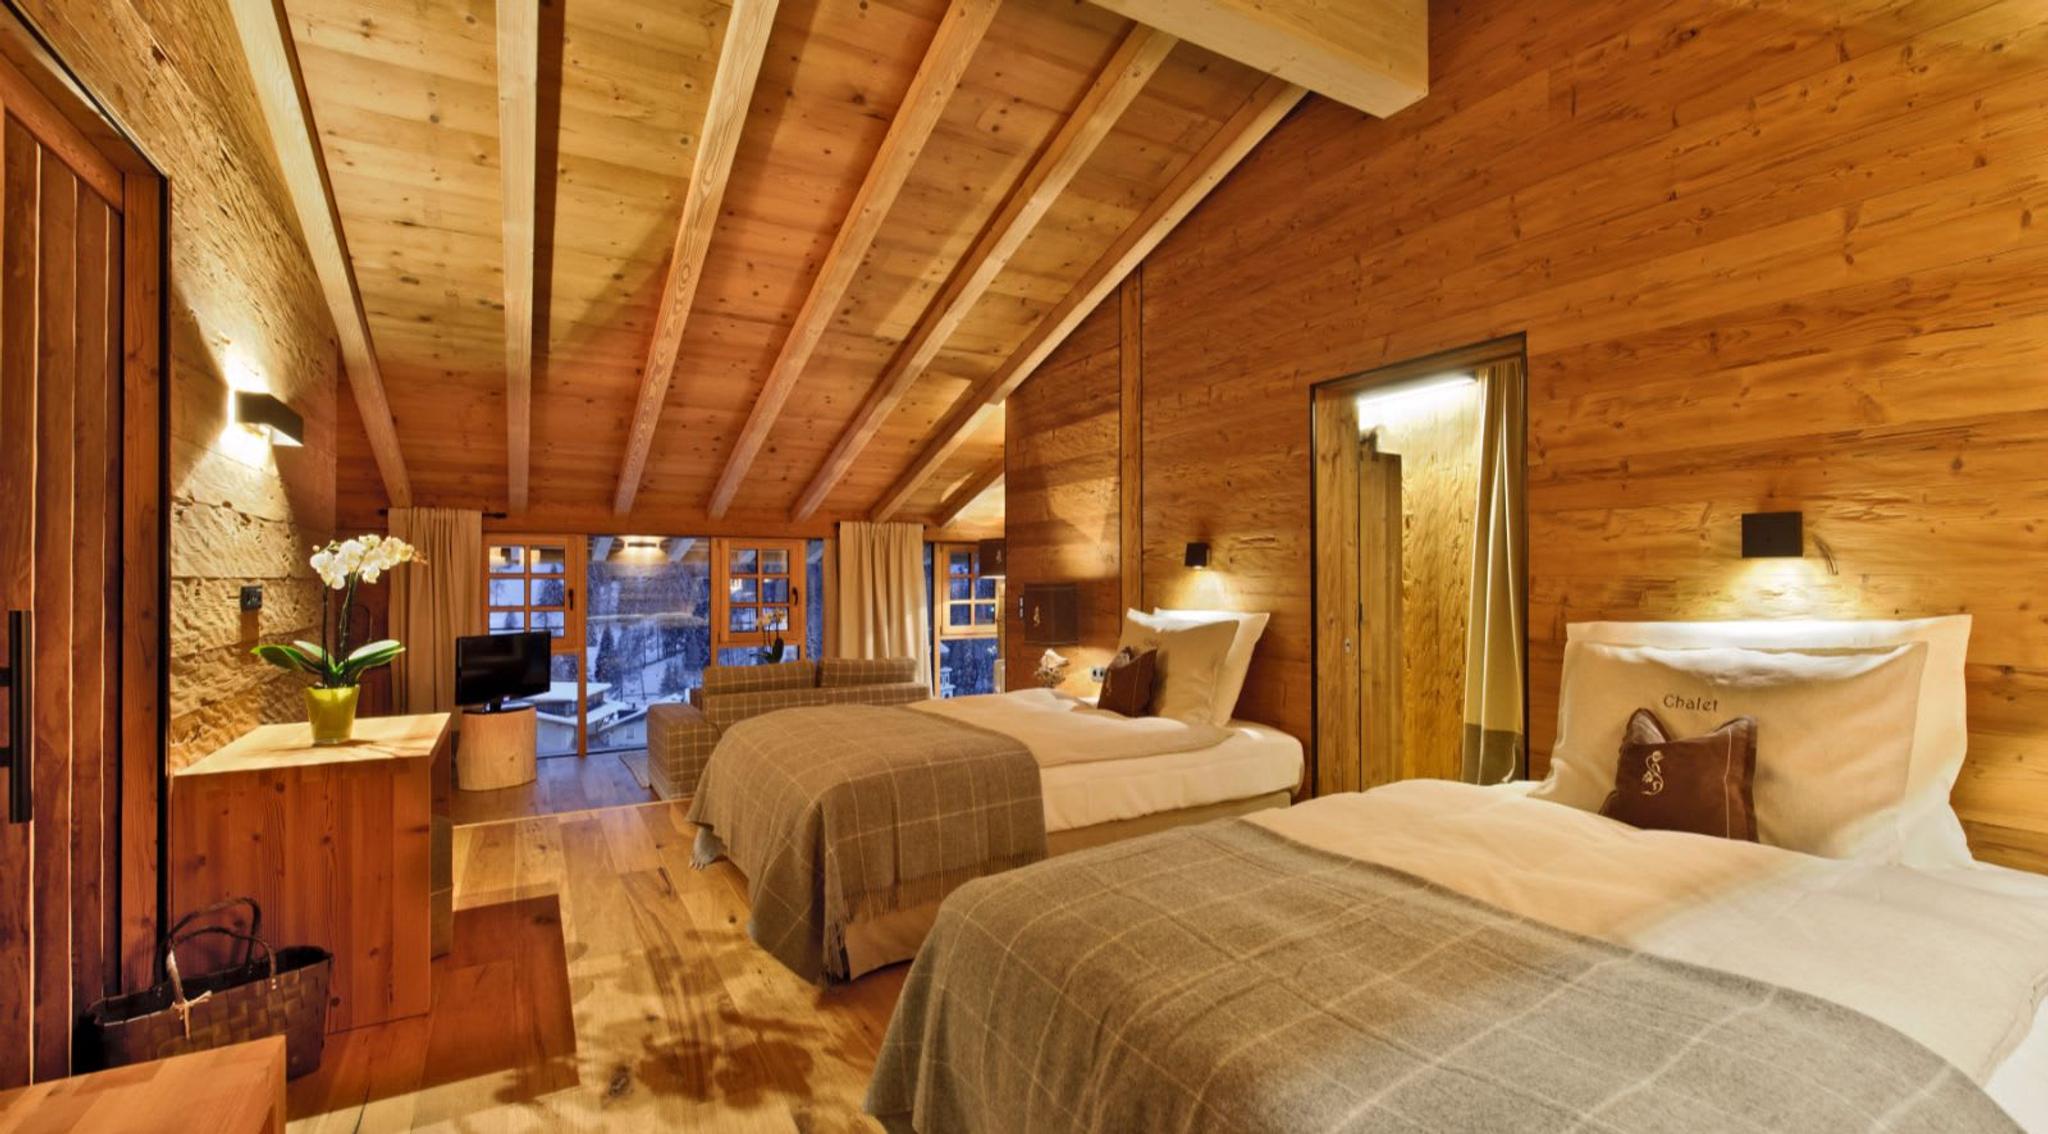 Sleeping area of the Chalet Gran Cil, one of the five amazing Chalet of the Hotel Fanes with wooden interiors, cashmere tartan blankets and a breath taking panoramic view on the village and slopes